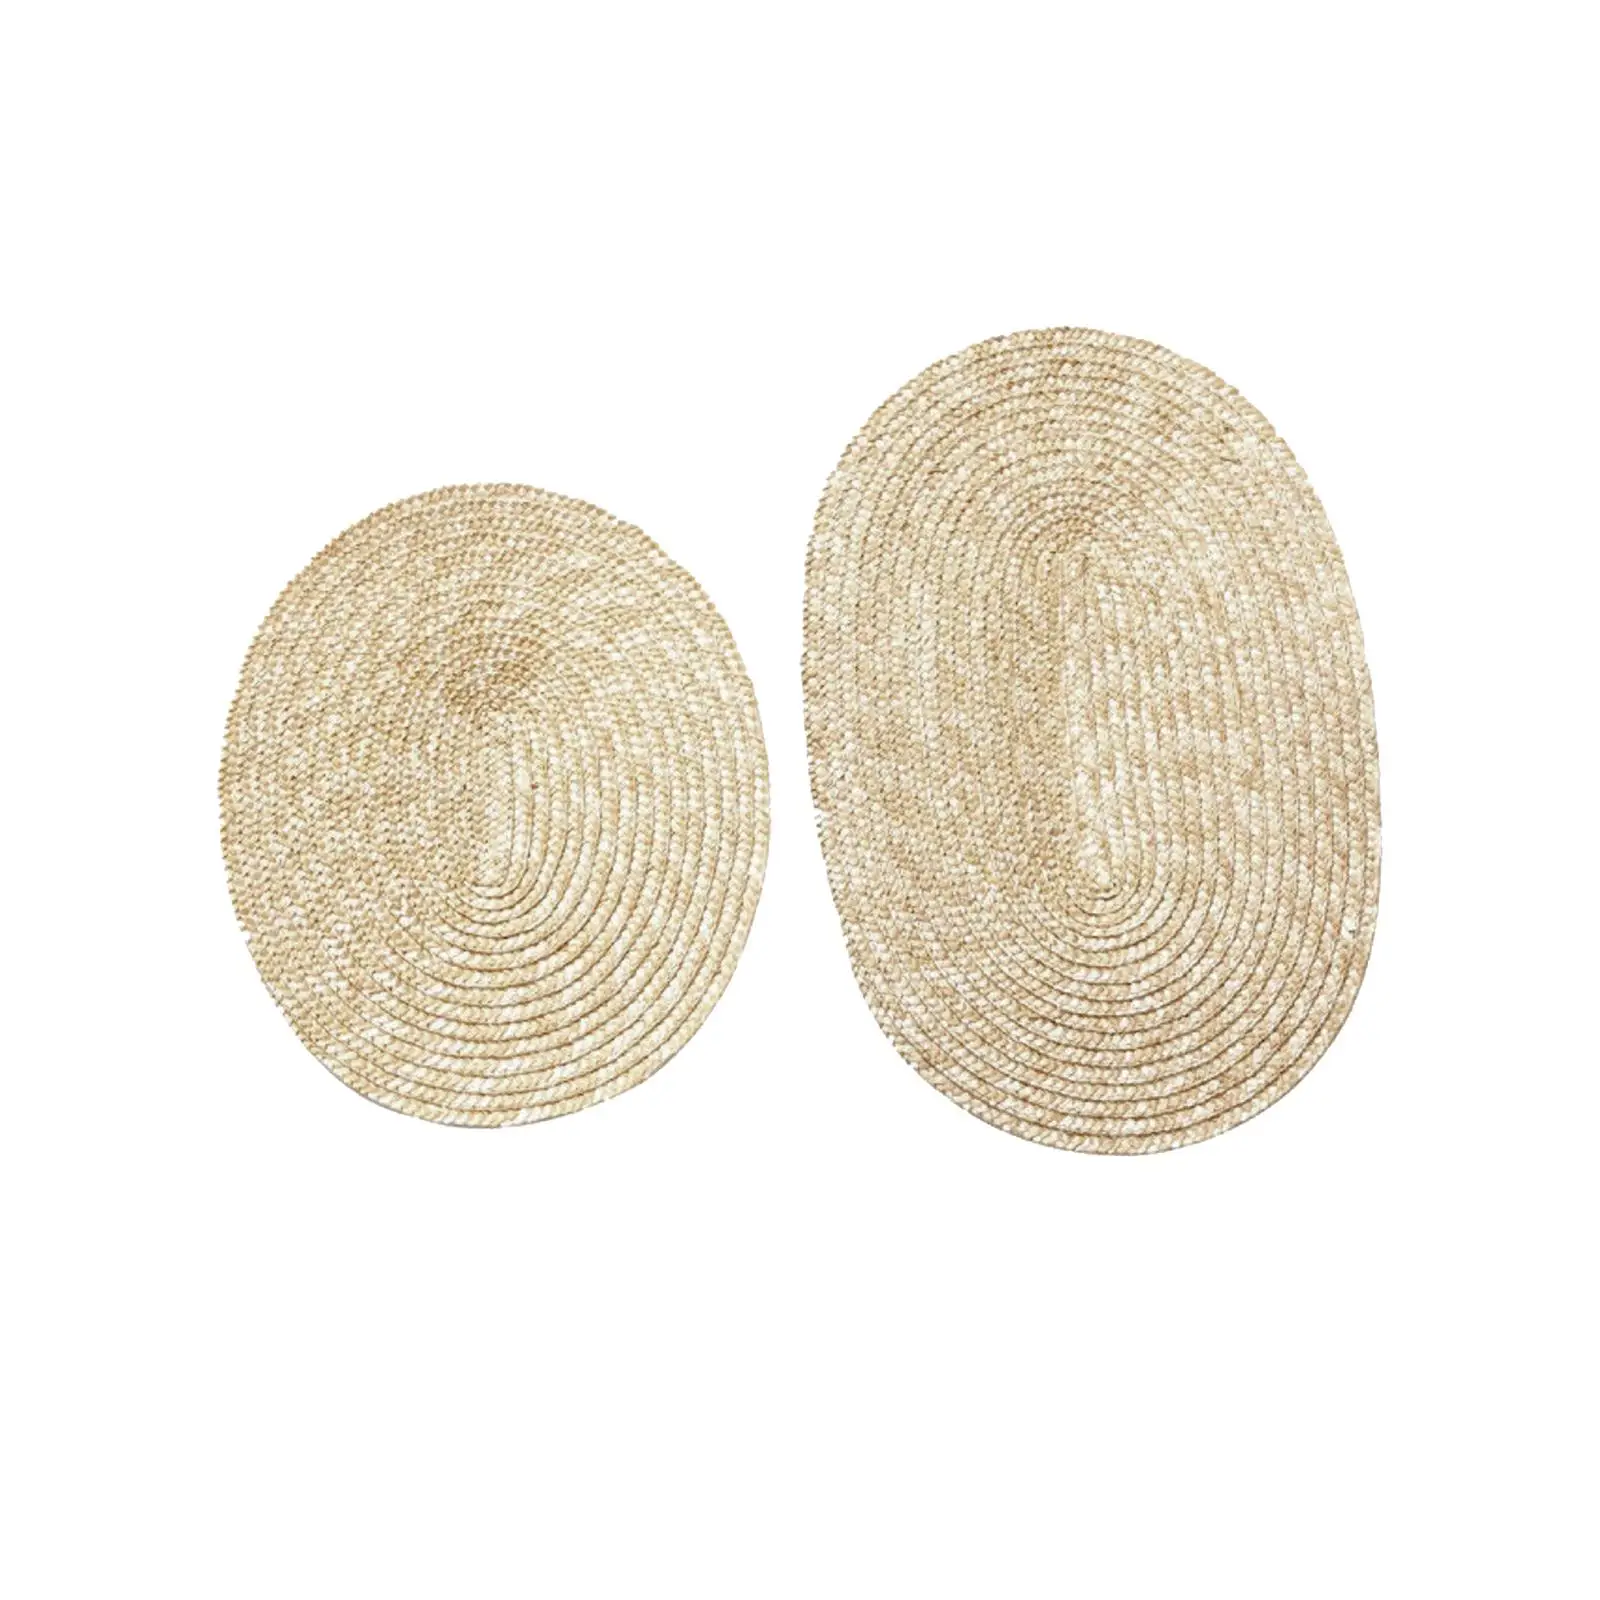 Straw Hats Braided Floppy Straw Bonnet Cap for Boater Travel Casual